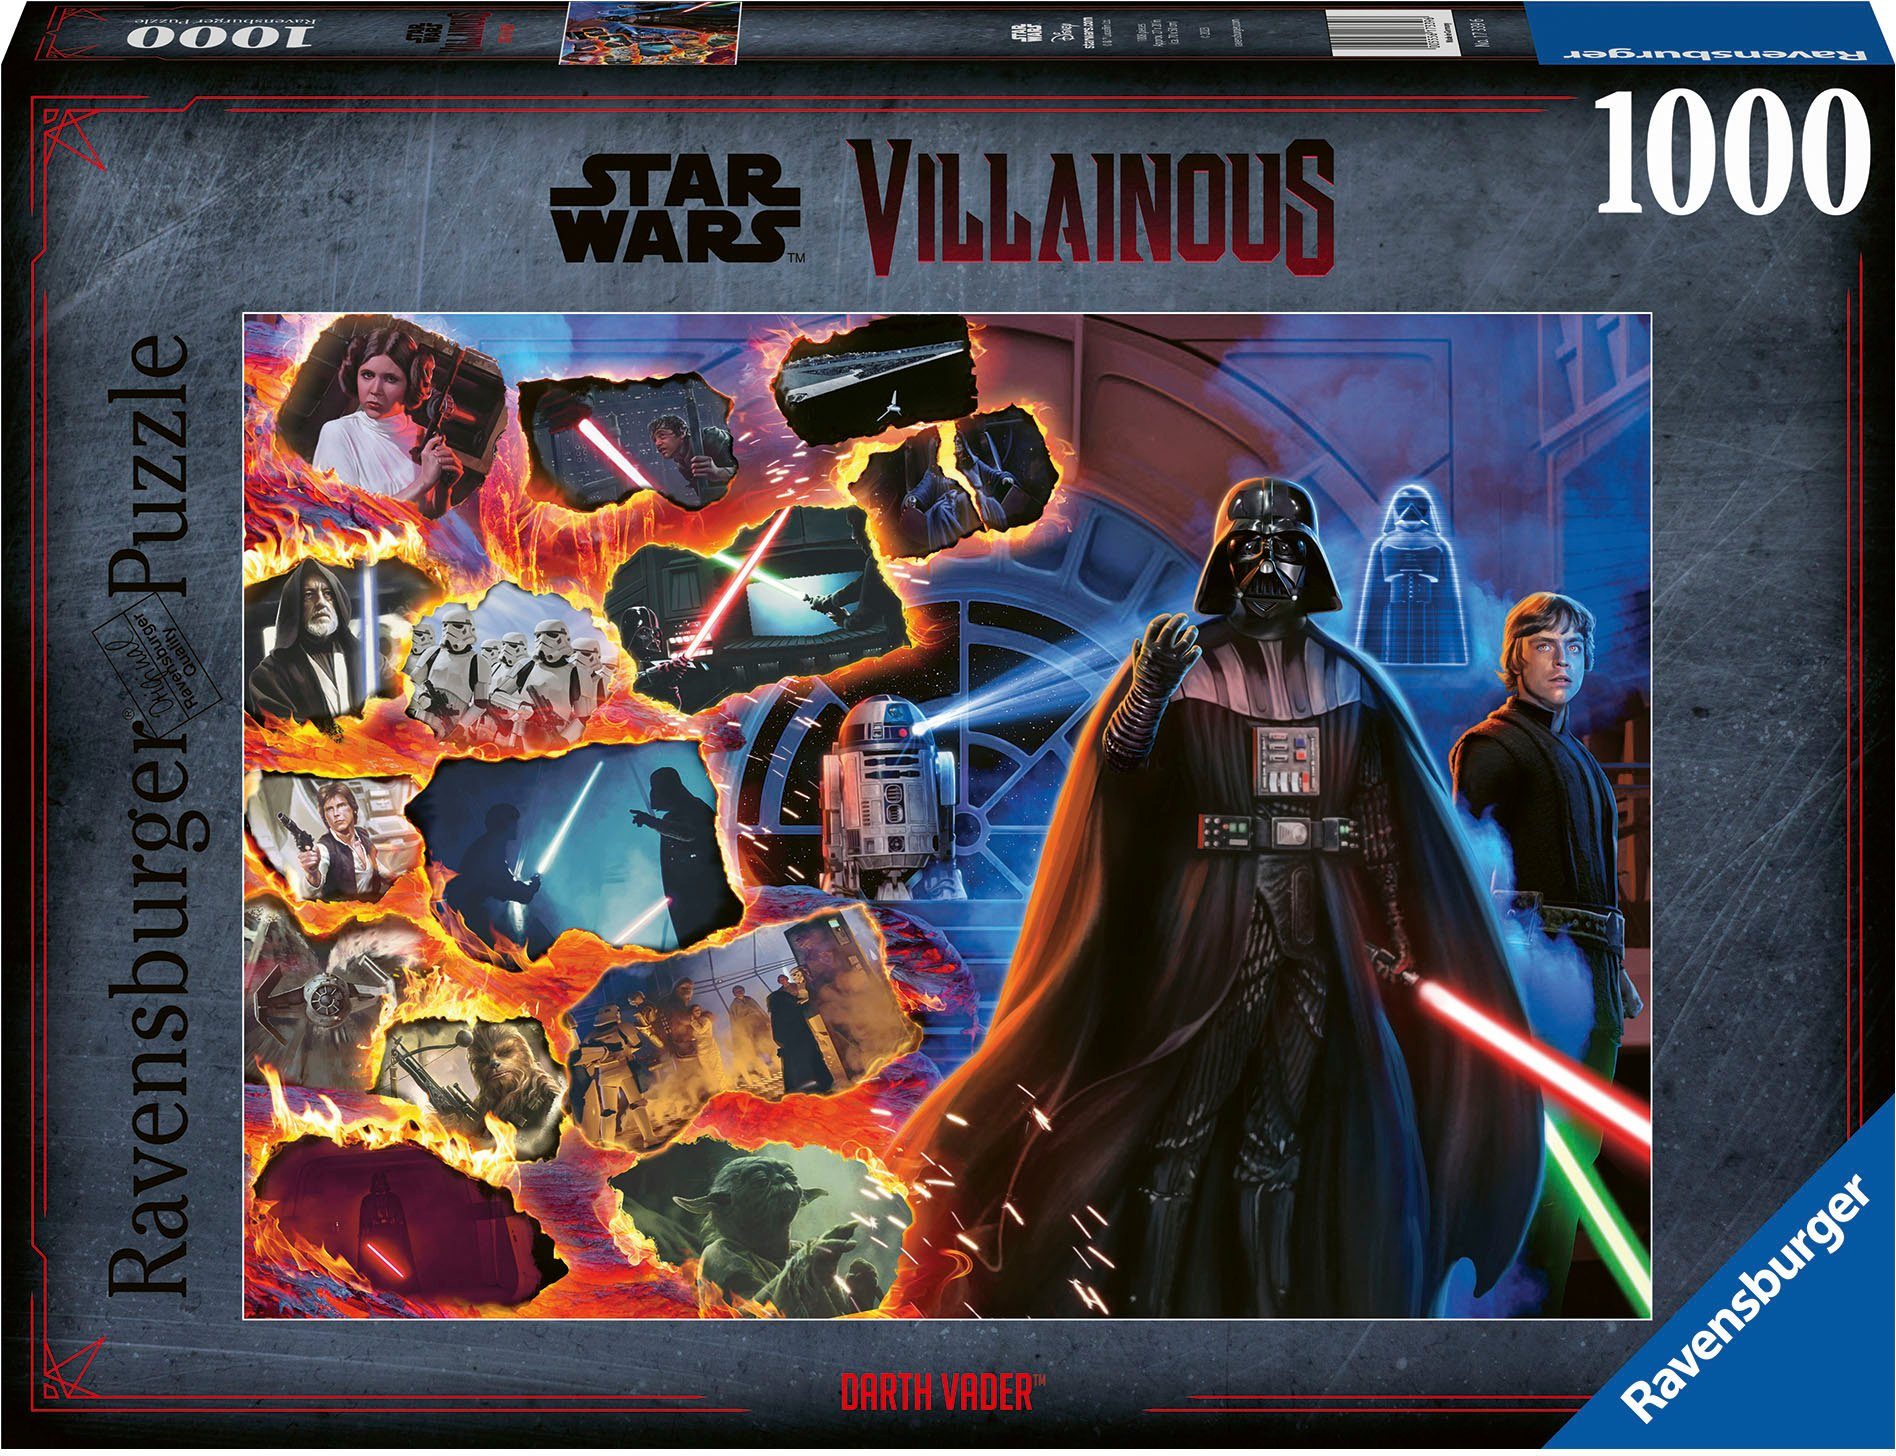 Ravensburger Puzzle Star Wars Villainous, Darth Vader, 1000 Puzzleteile, Made in Germany